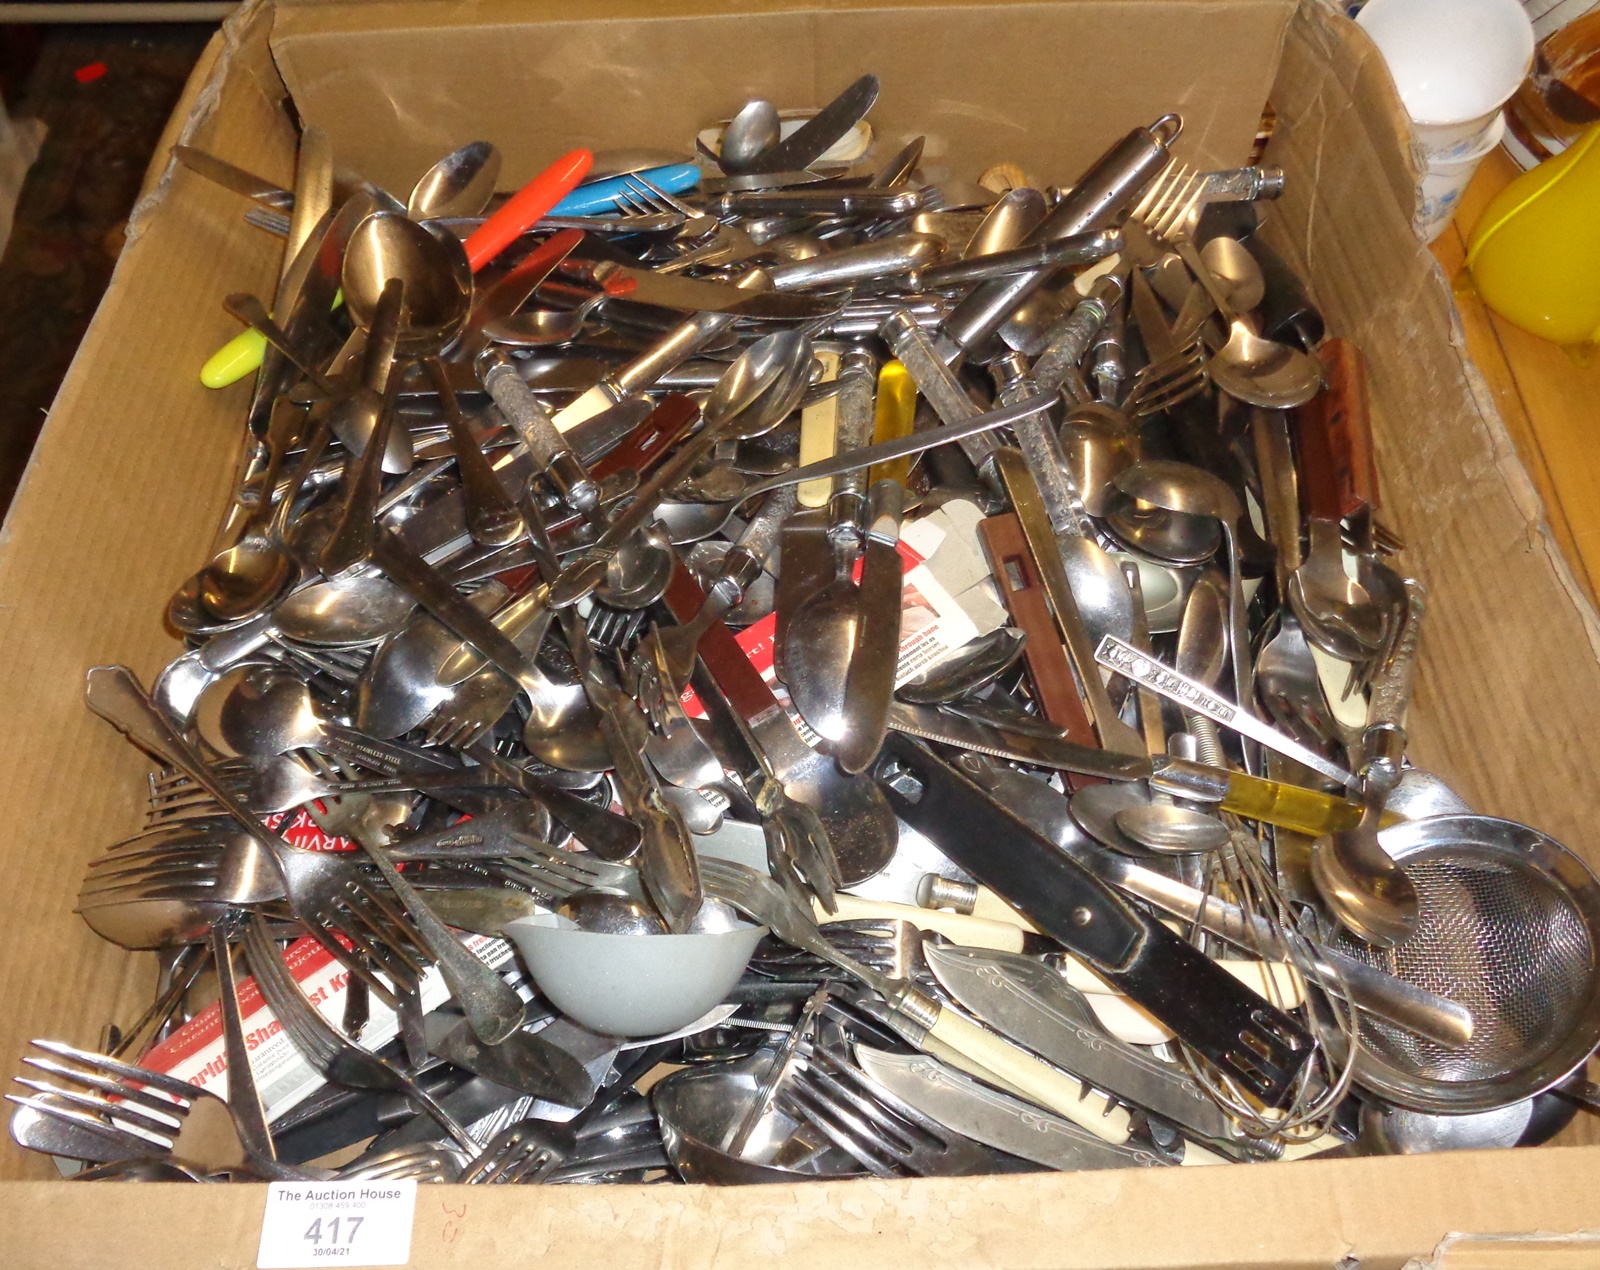 Large quantity of stainless steel and plated cutlery